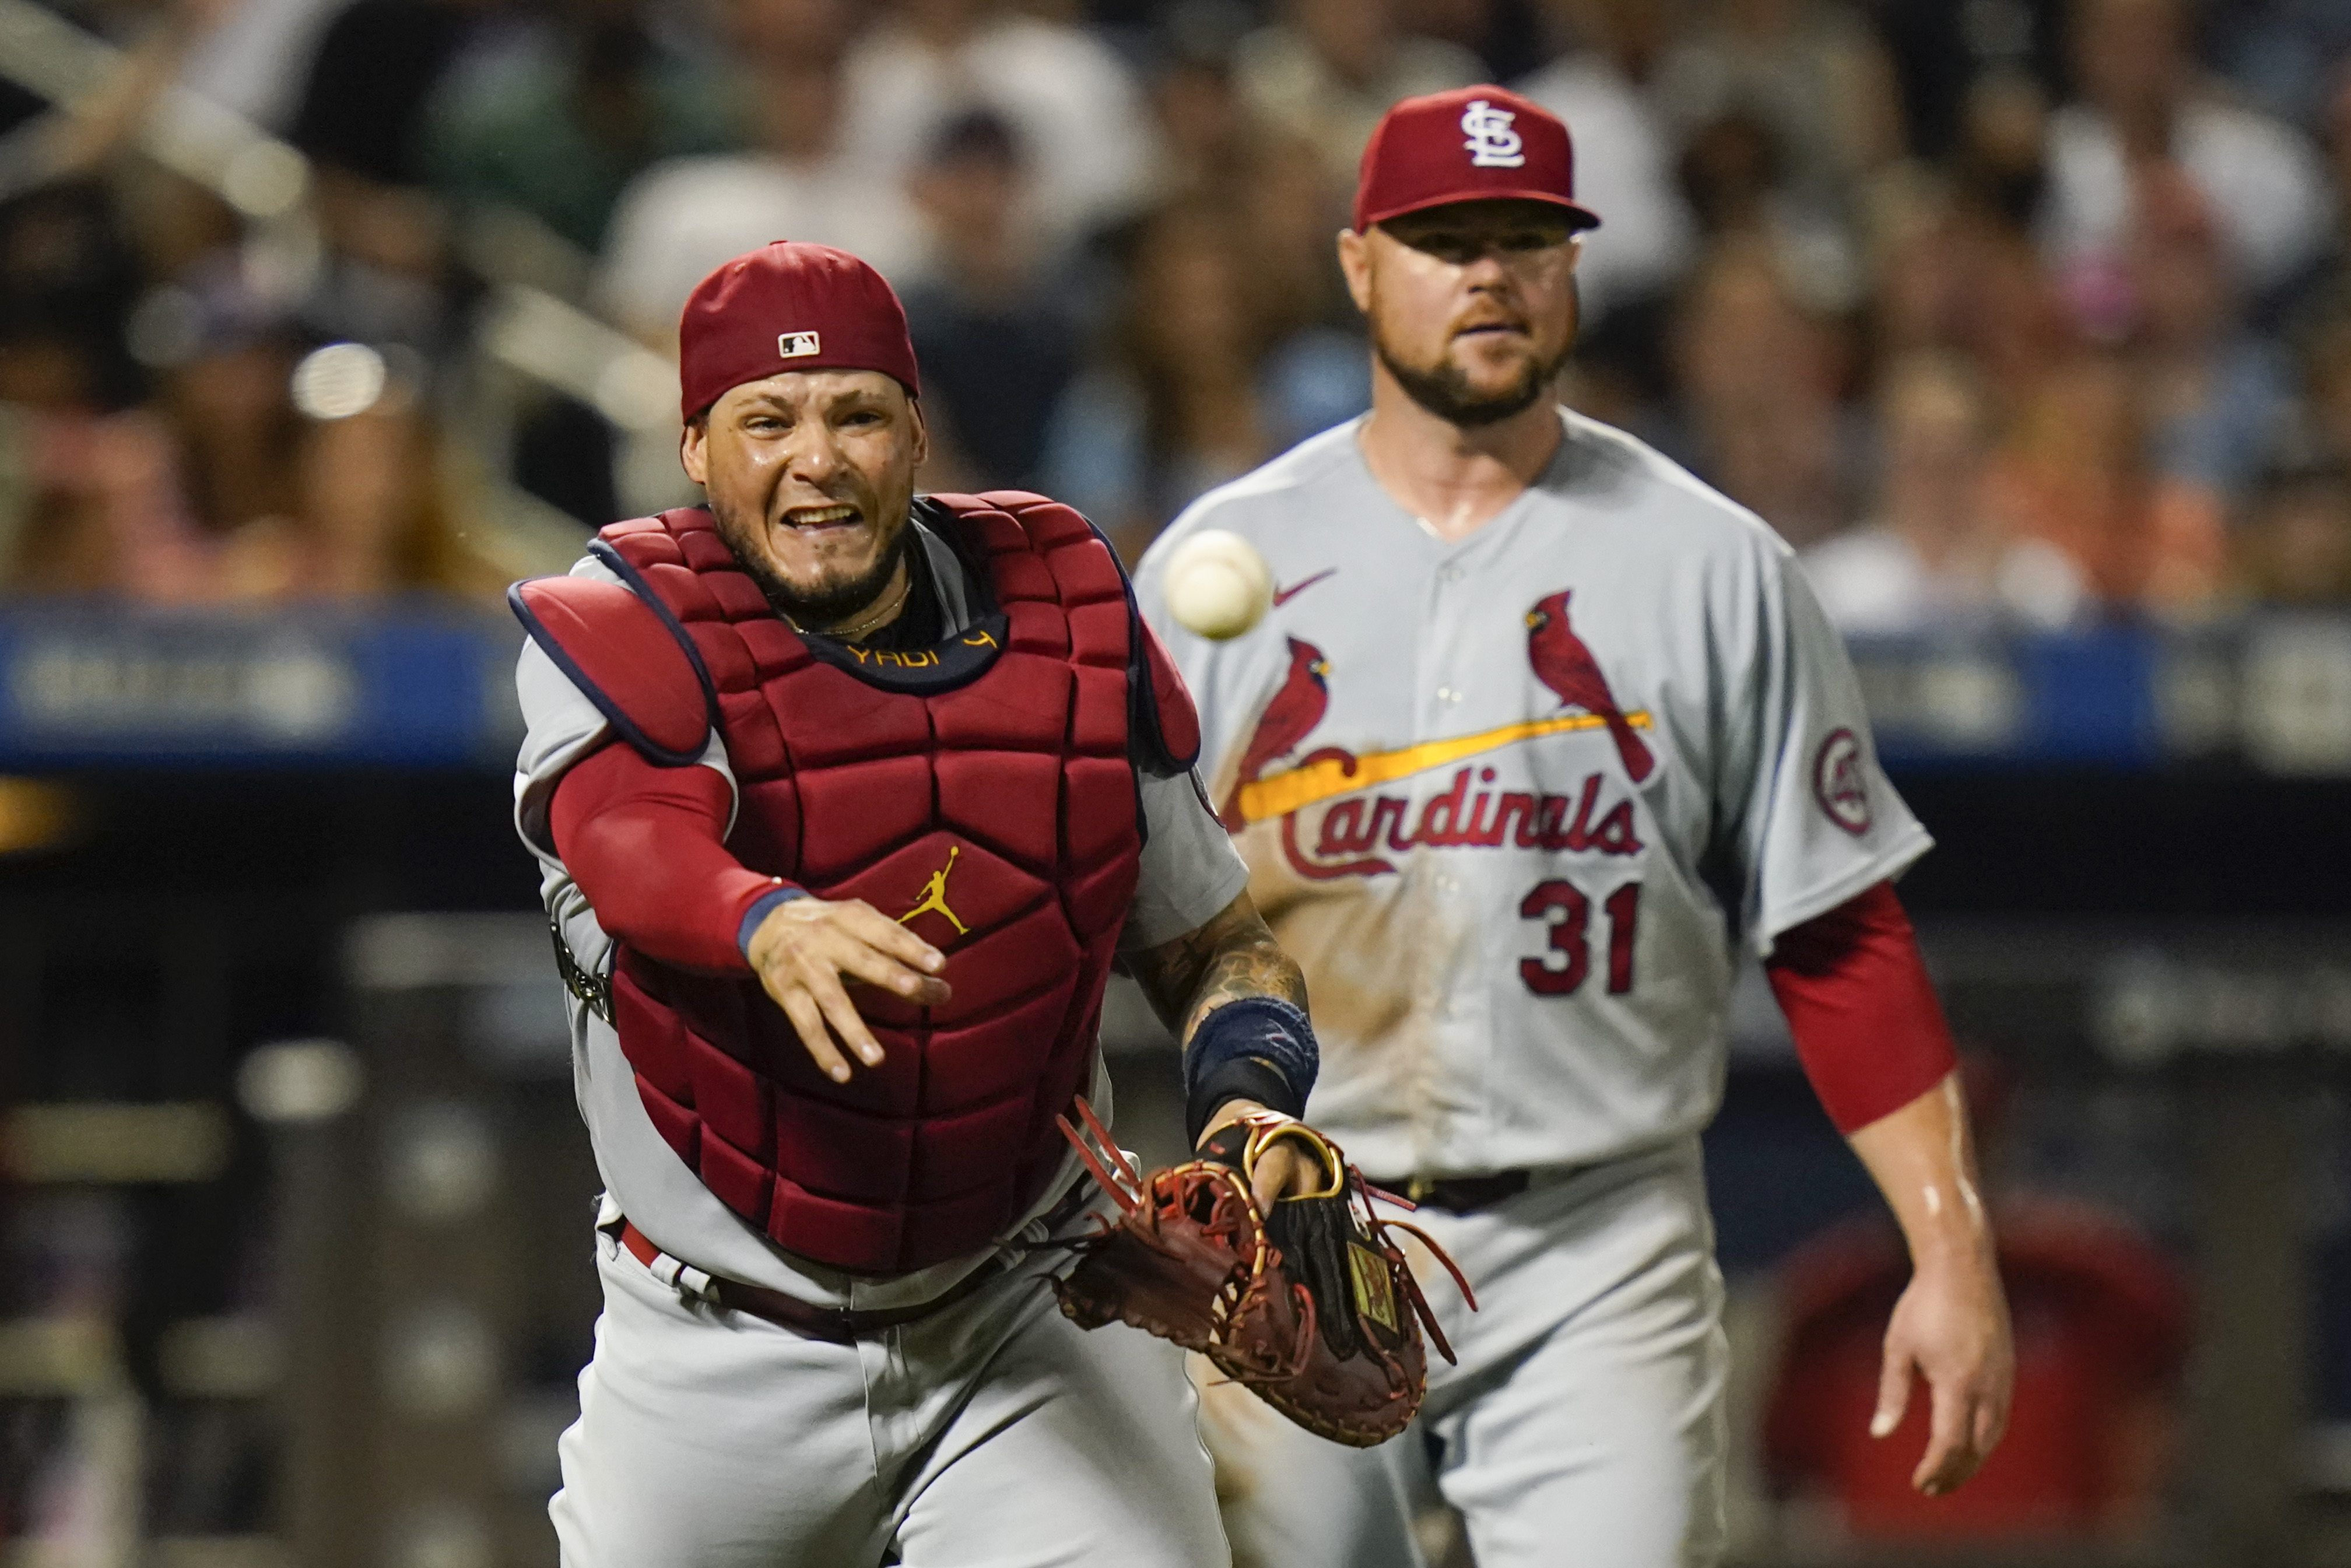 On Mother's Day, Cardinals' Molina gives his mom a treat